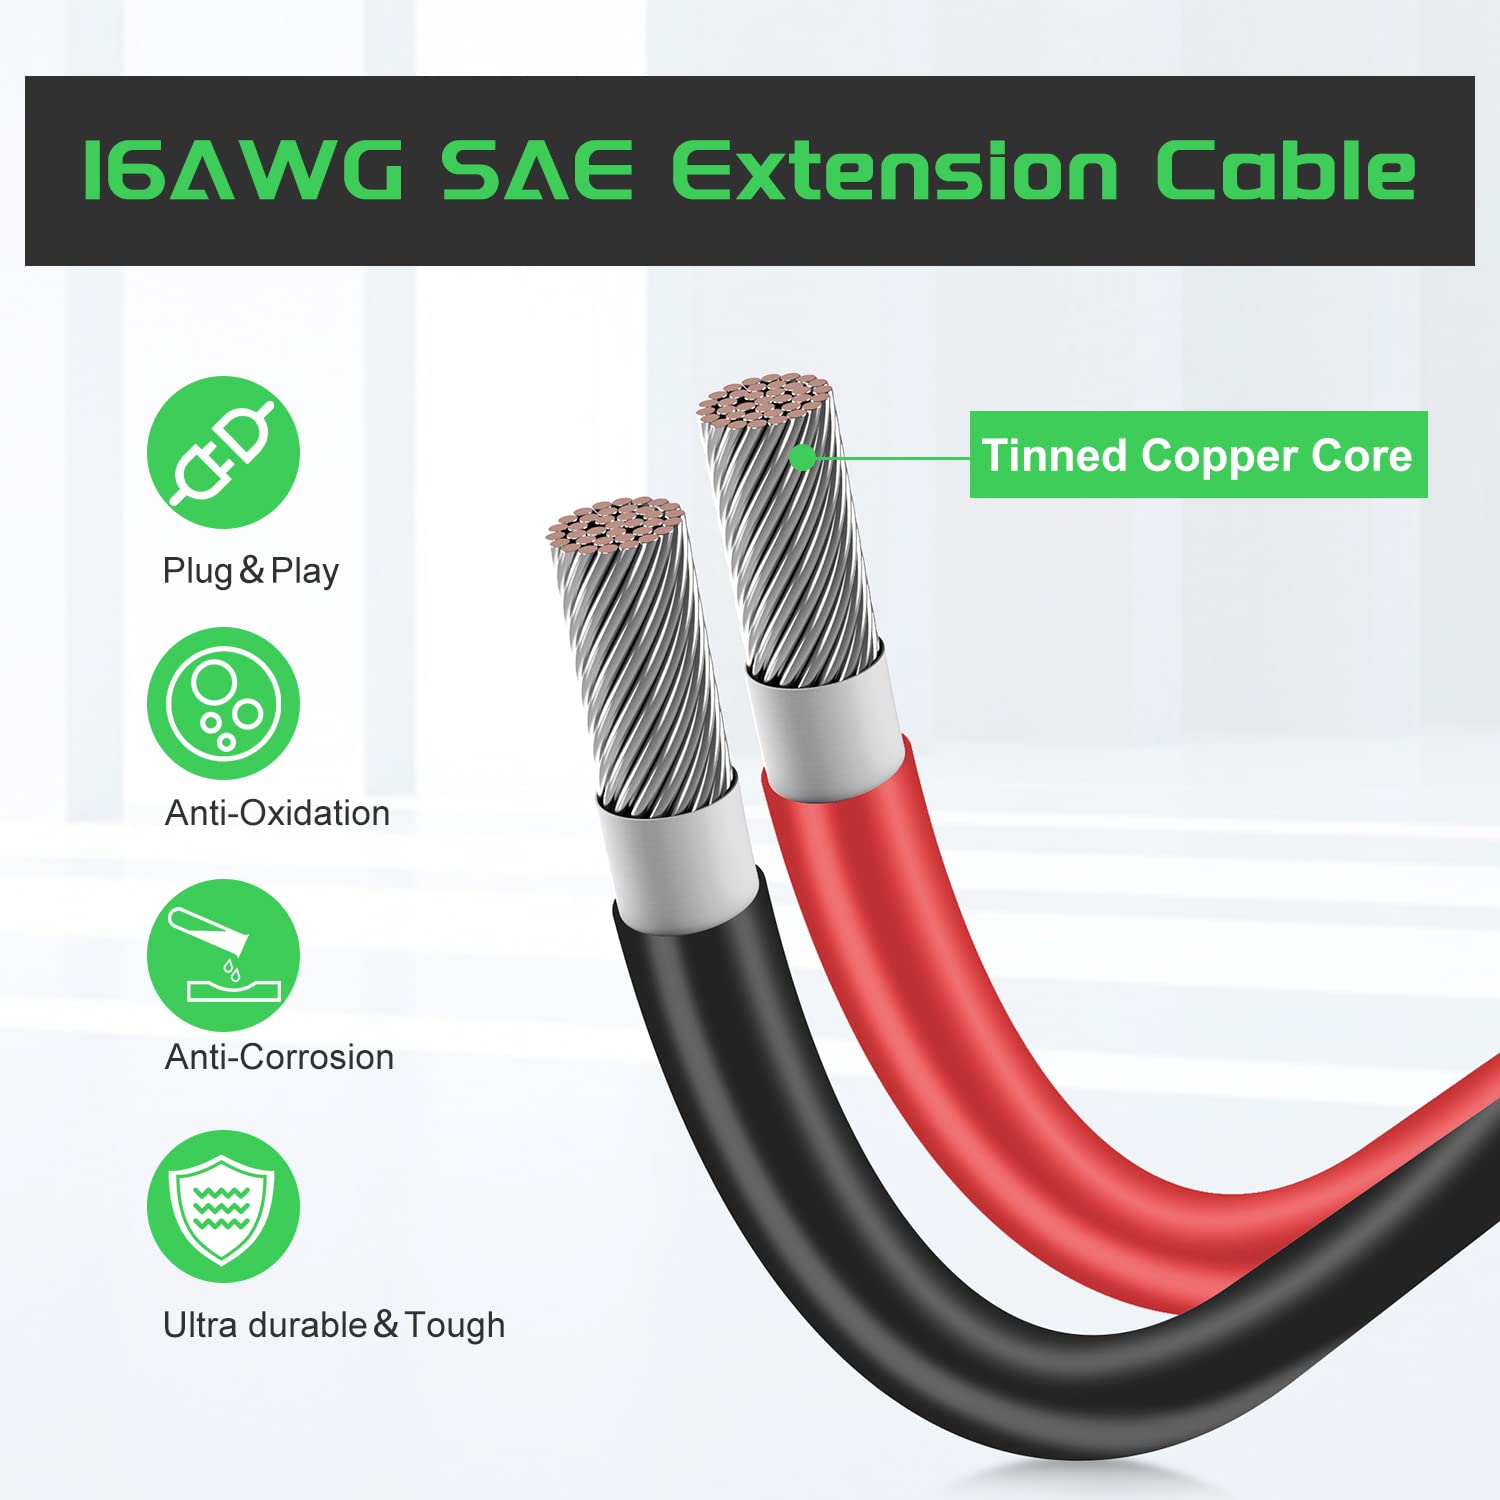 Bateria Power SAE Connector SAE Extension Cable, SAE Power Socket Sidewall Port SAE Cable Quick Connect for Solar Generator Battery Charger